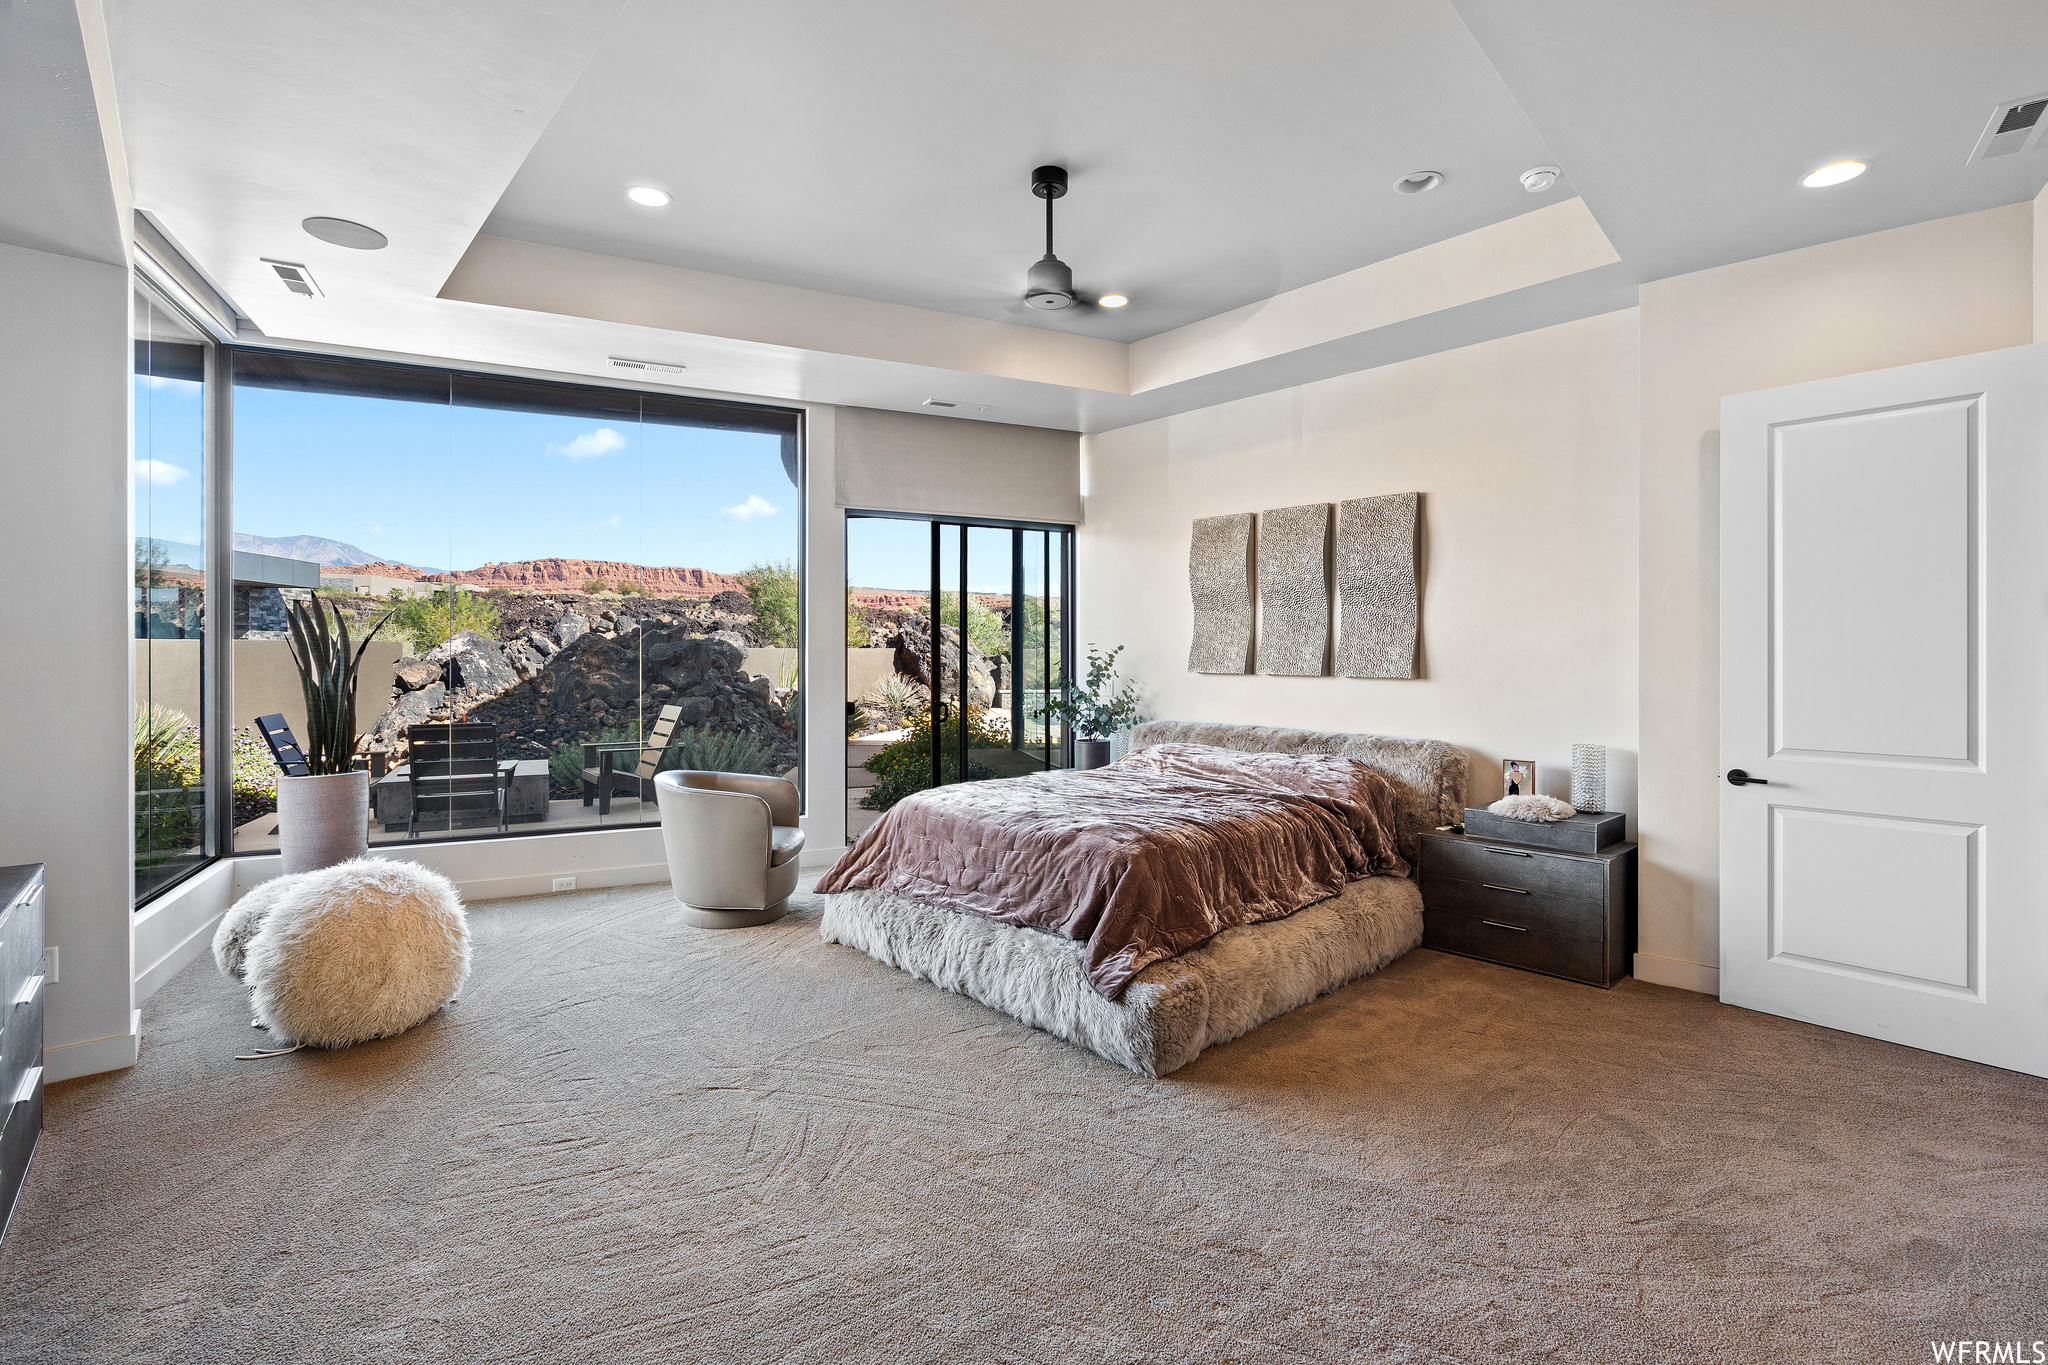 Bedroom with light carpet, a raised ceiling, ceiling fan, and access to exterior